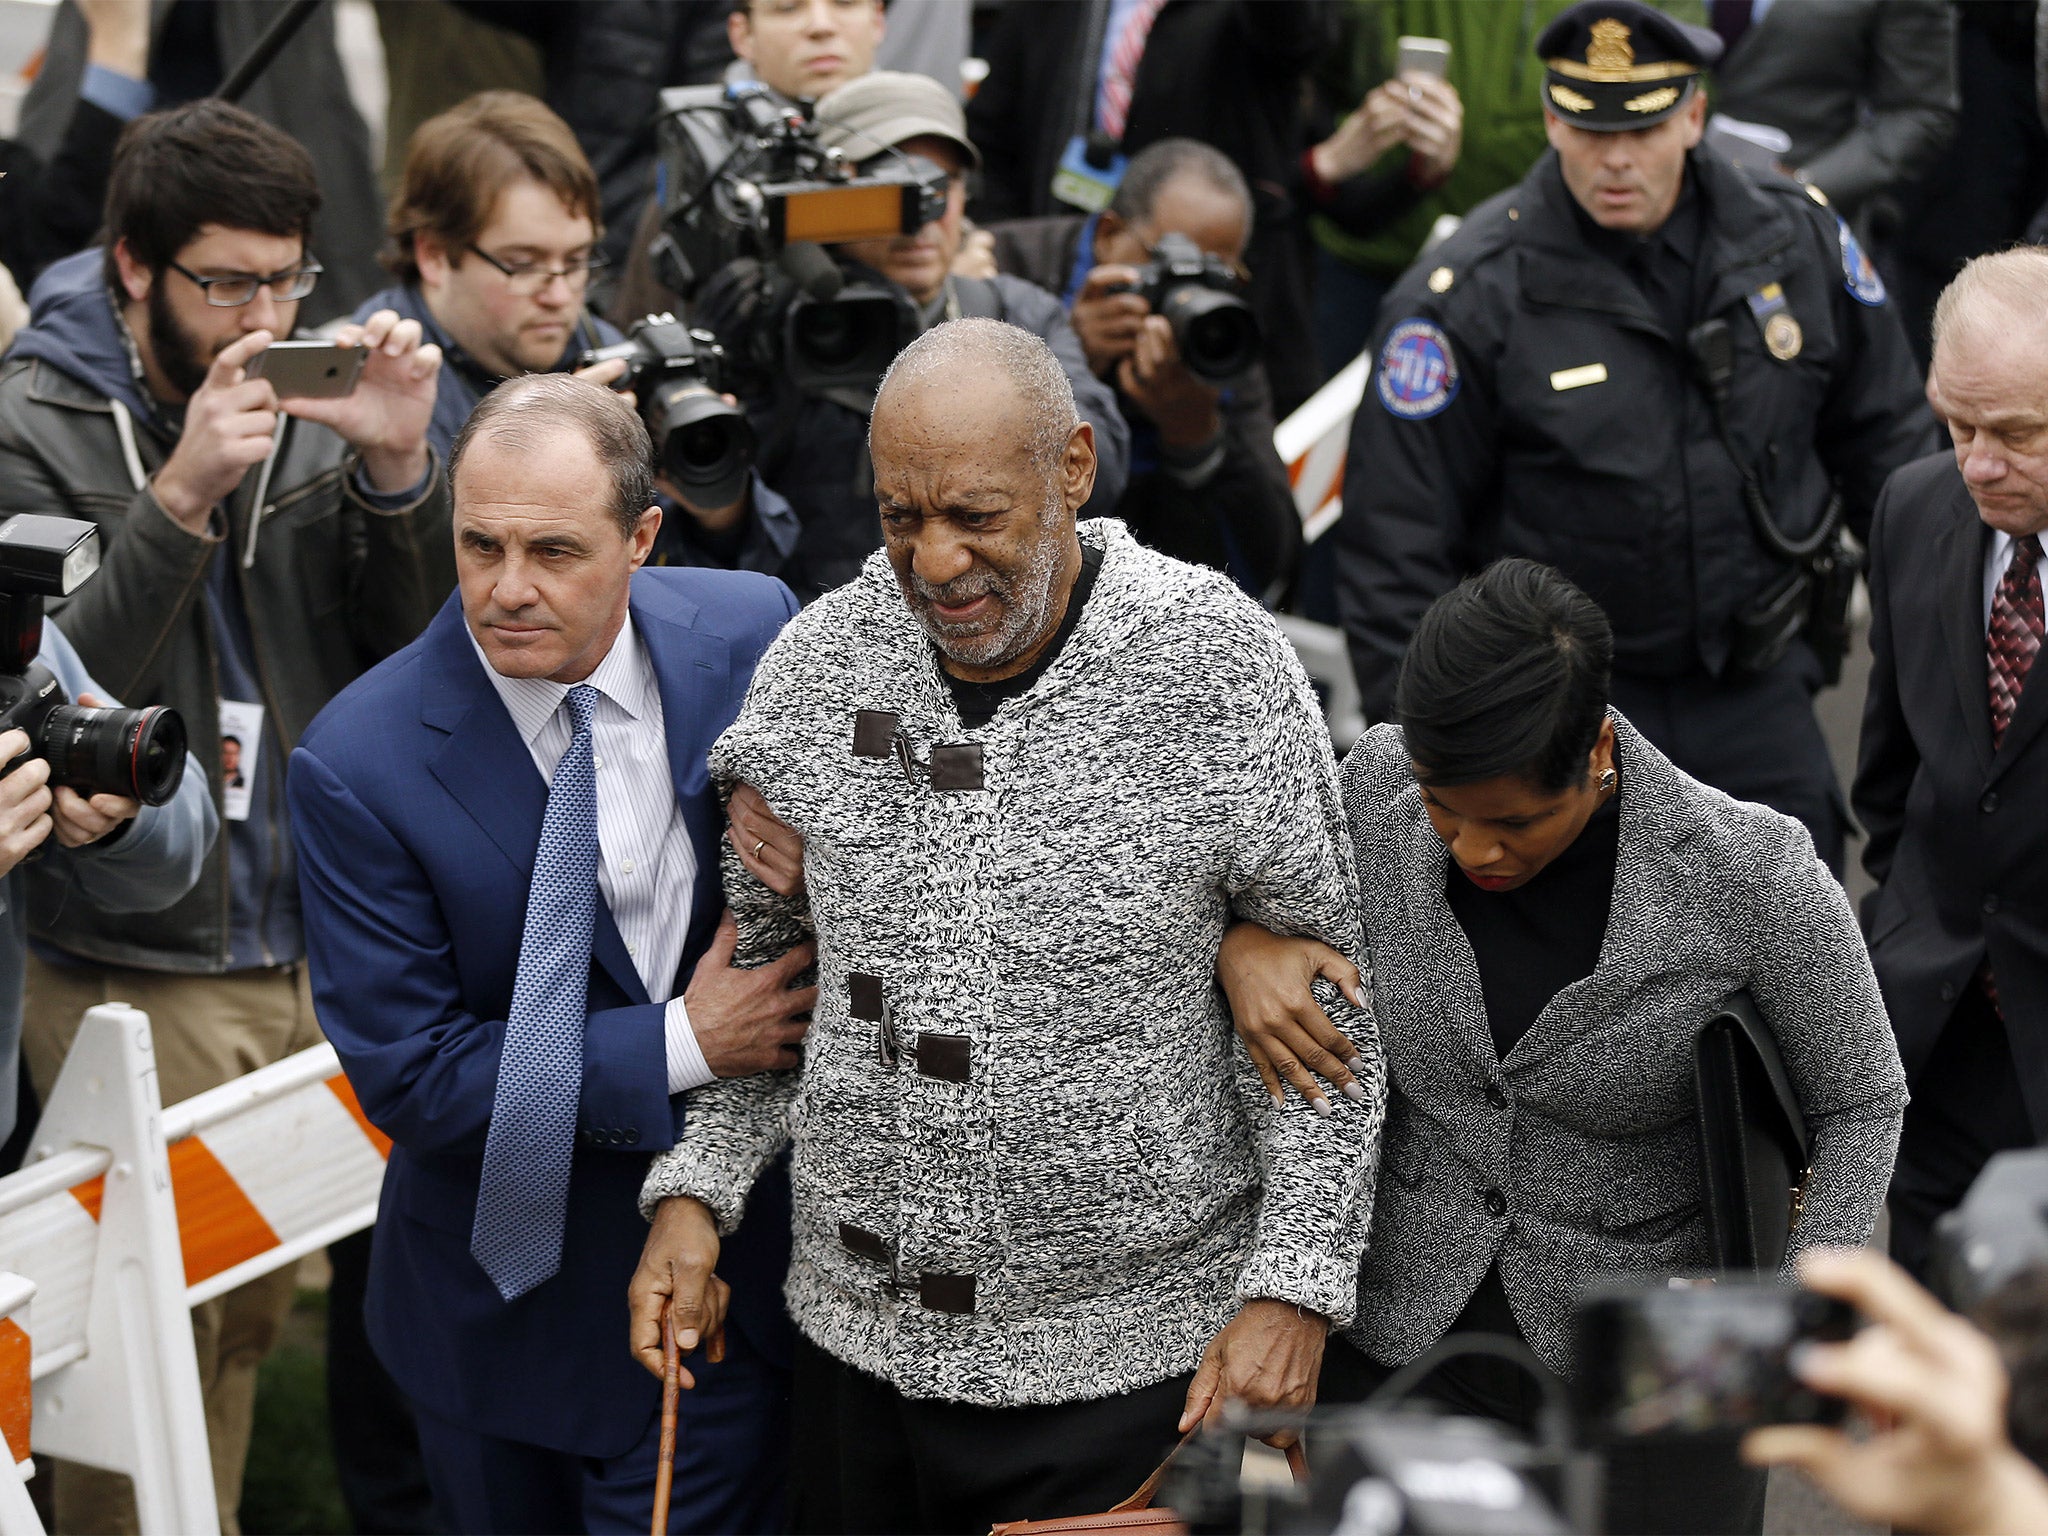 Bill Cosby arrives at court to face a felony charge of aggravated indecent assault